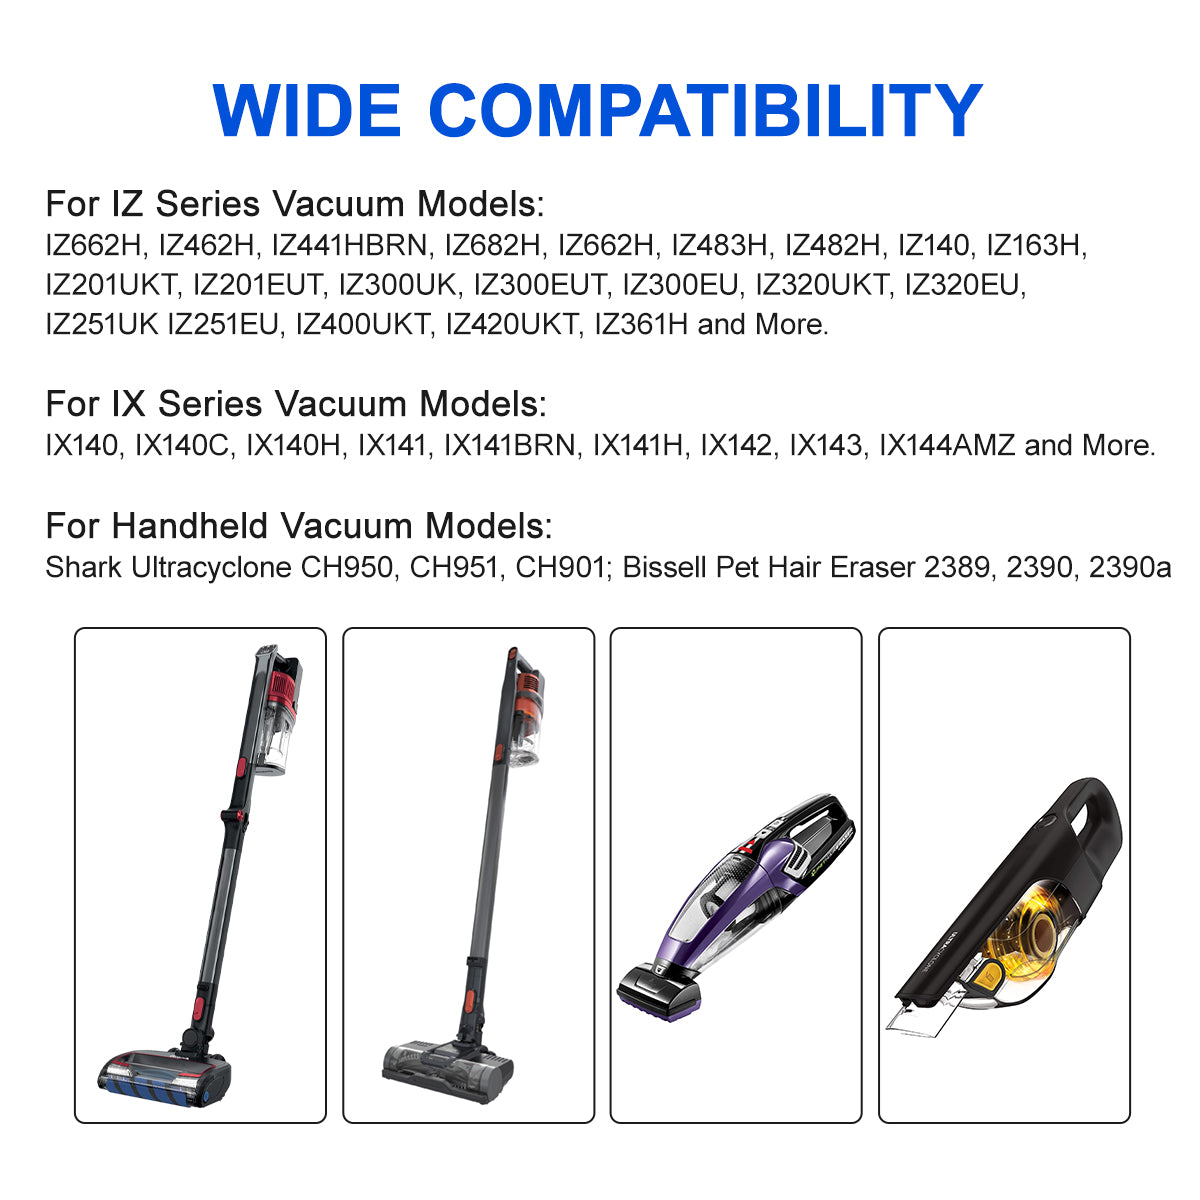 ur cordless vacuum wall mount is compatible with a wide range of cordless stick vacuum cleaners, including Shark Rocket IZ and IX Series, fits models IZ662H, IZ462H, IZ682H, IZ483H, IZ482H, IZ140, IZ163H, IZ361H,IZ363HT,IZ562H ; IX140, IX140H, IX141, IX141H, IX142; WZ140, UZ155 and Ultracyclone CH950, CH951, CH901; Dyson V10 V11 V12 V15 Outsize Vacuum; Bissell Pet Hair Eraser Model 2389,2390,2390a and more.(Note: The wall mount does not fit HV300 series.)